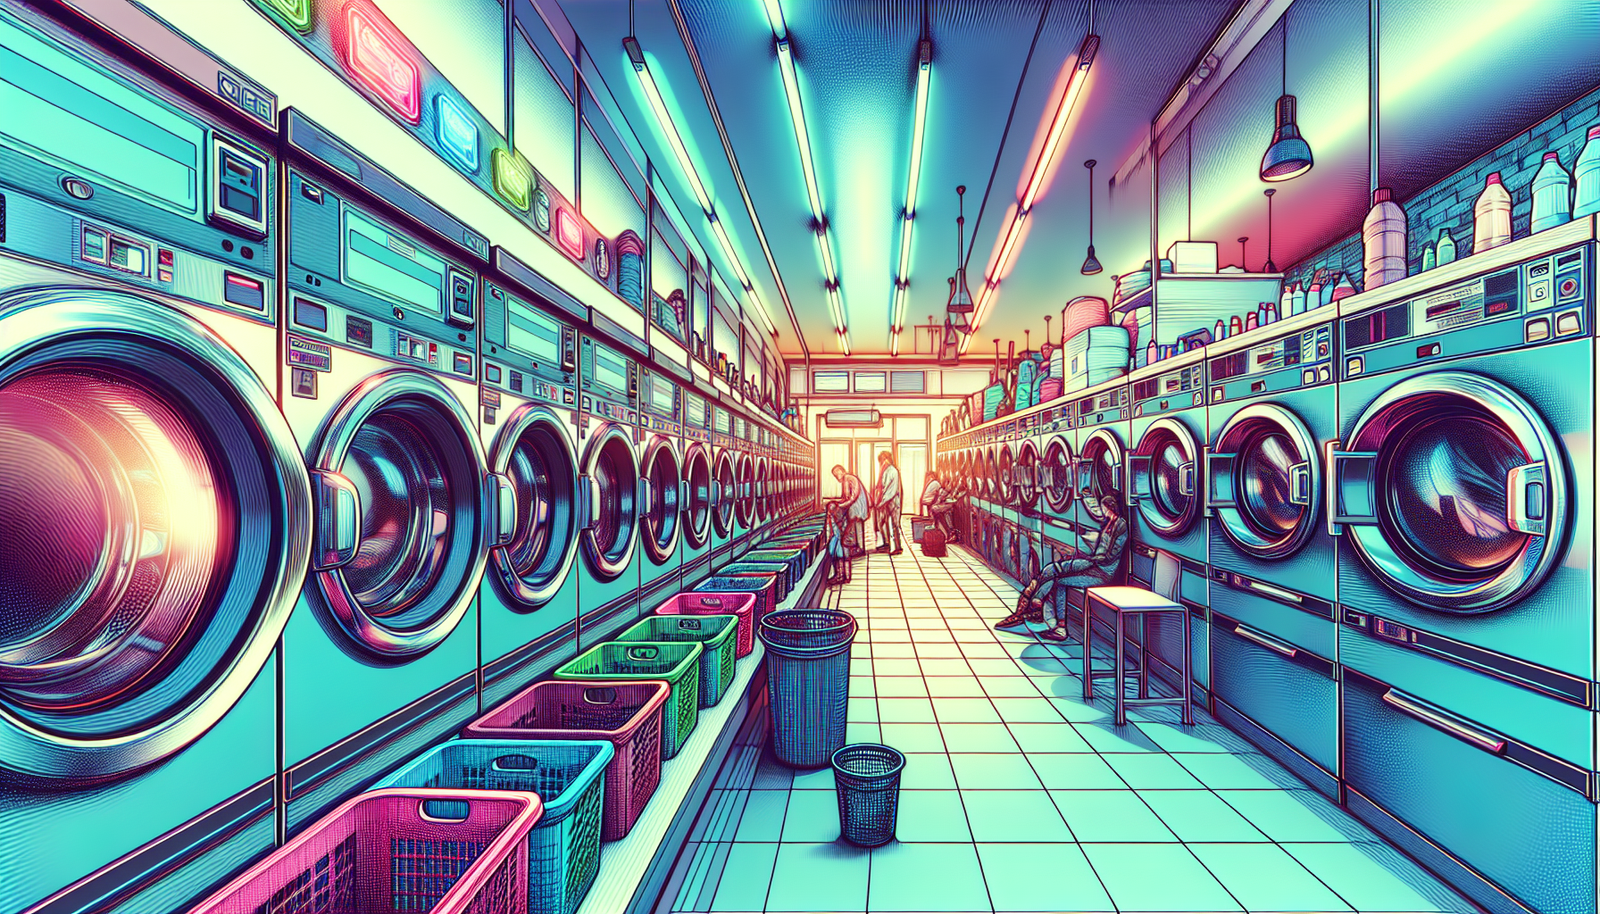 Illustration of a modern and vibrant laundromat